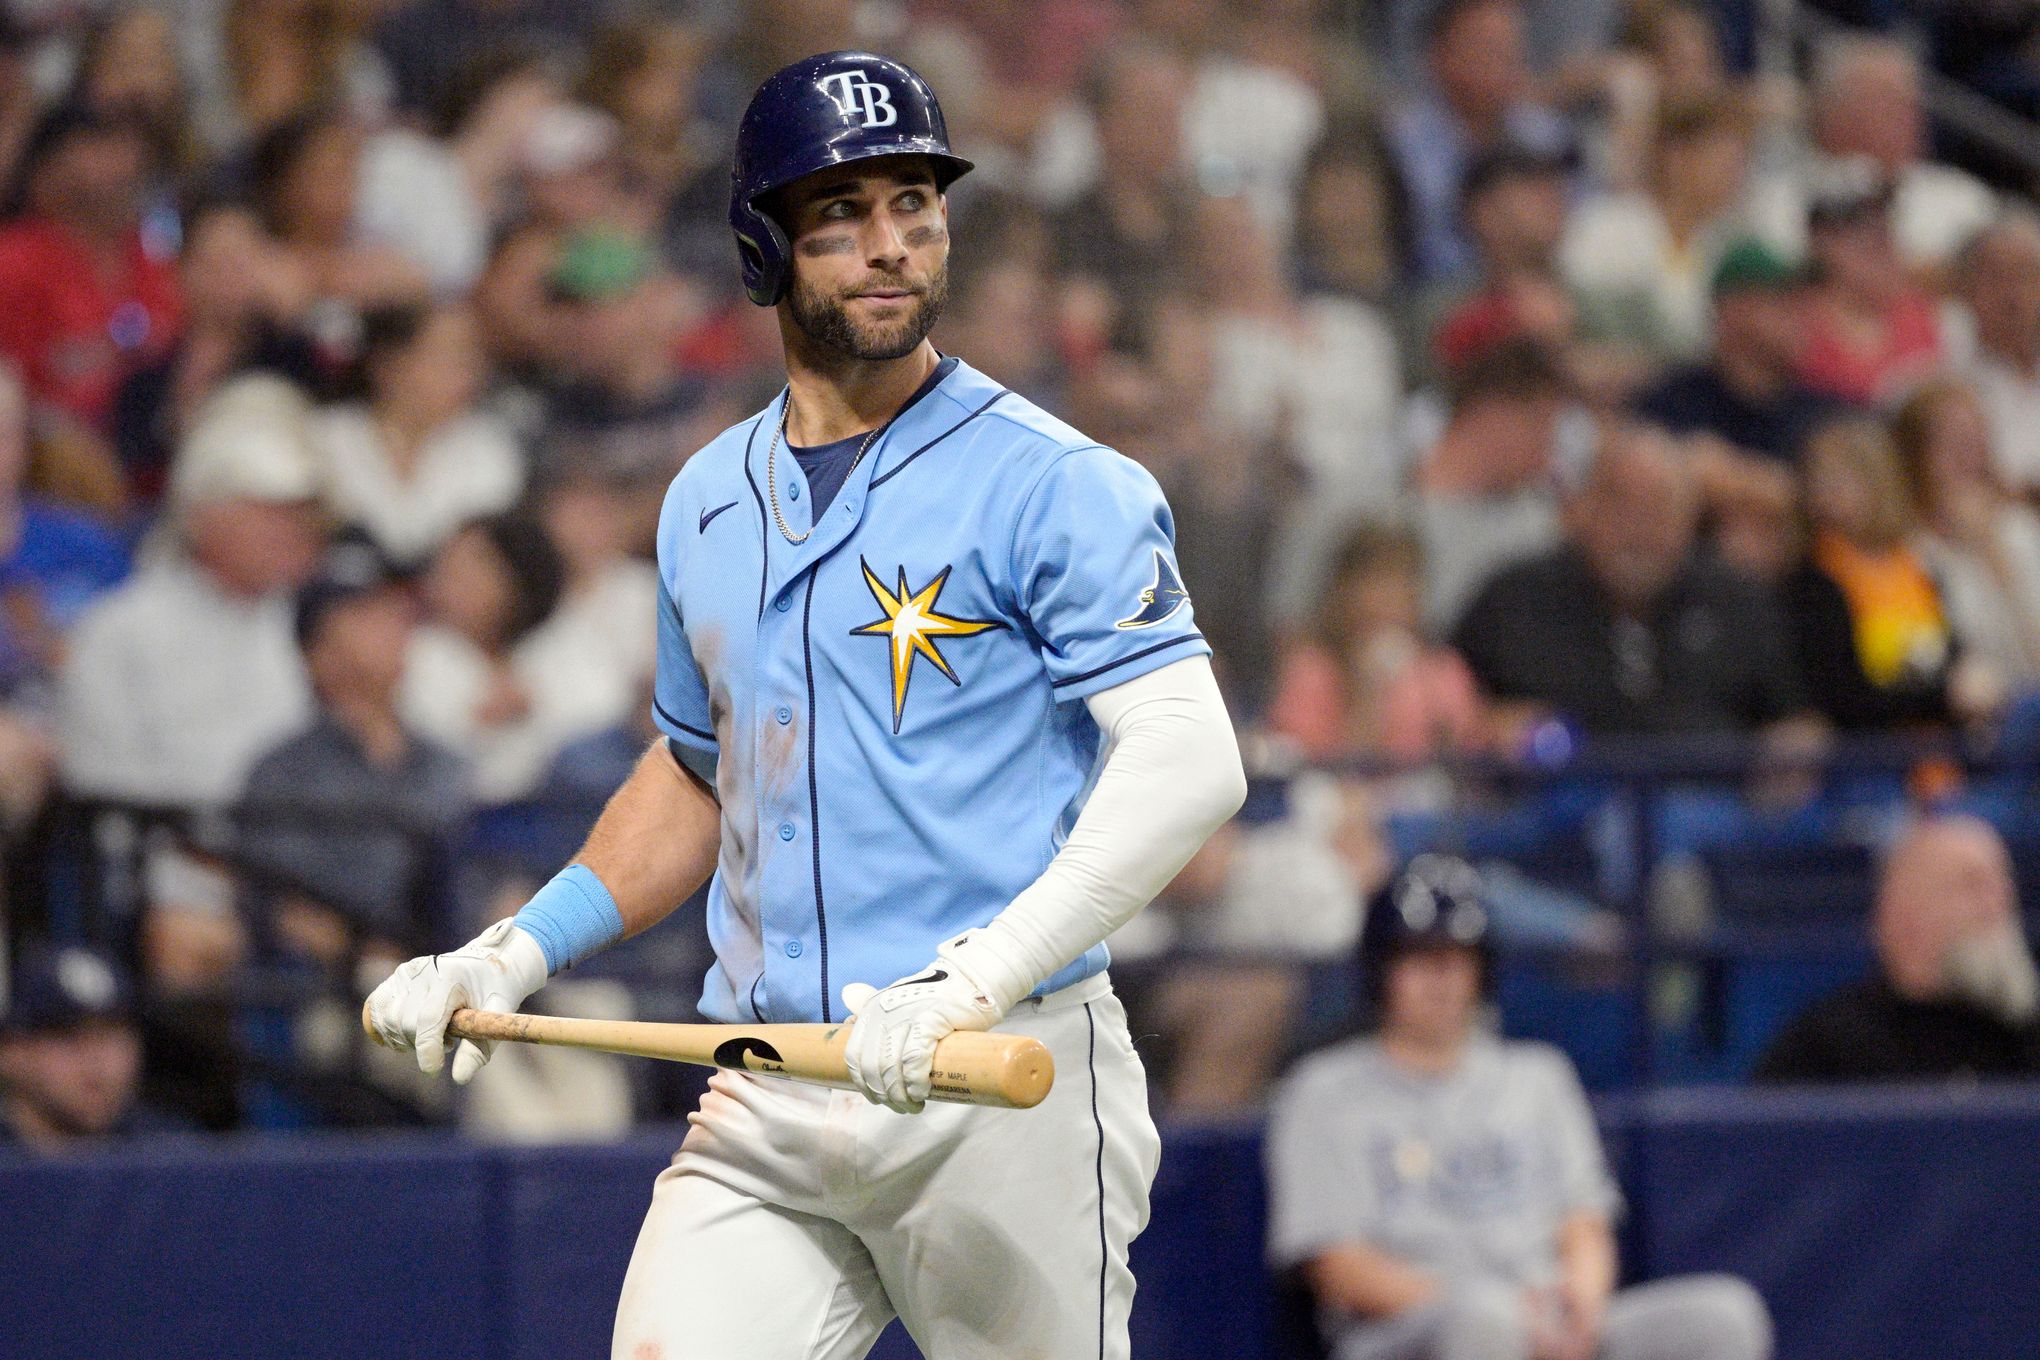 OF Kevin Kiermaier, Blue Jays finalize $9M, 1-year contract